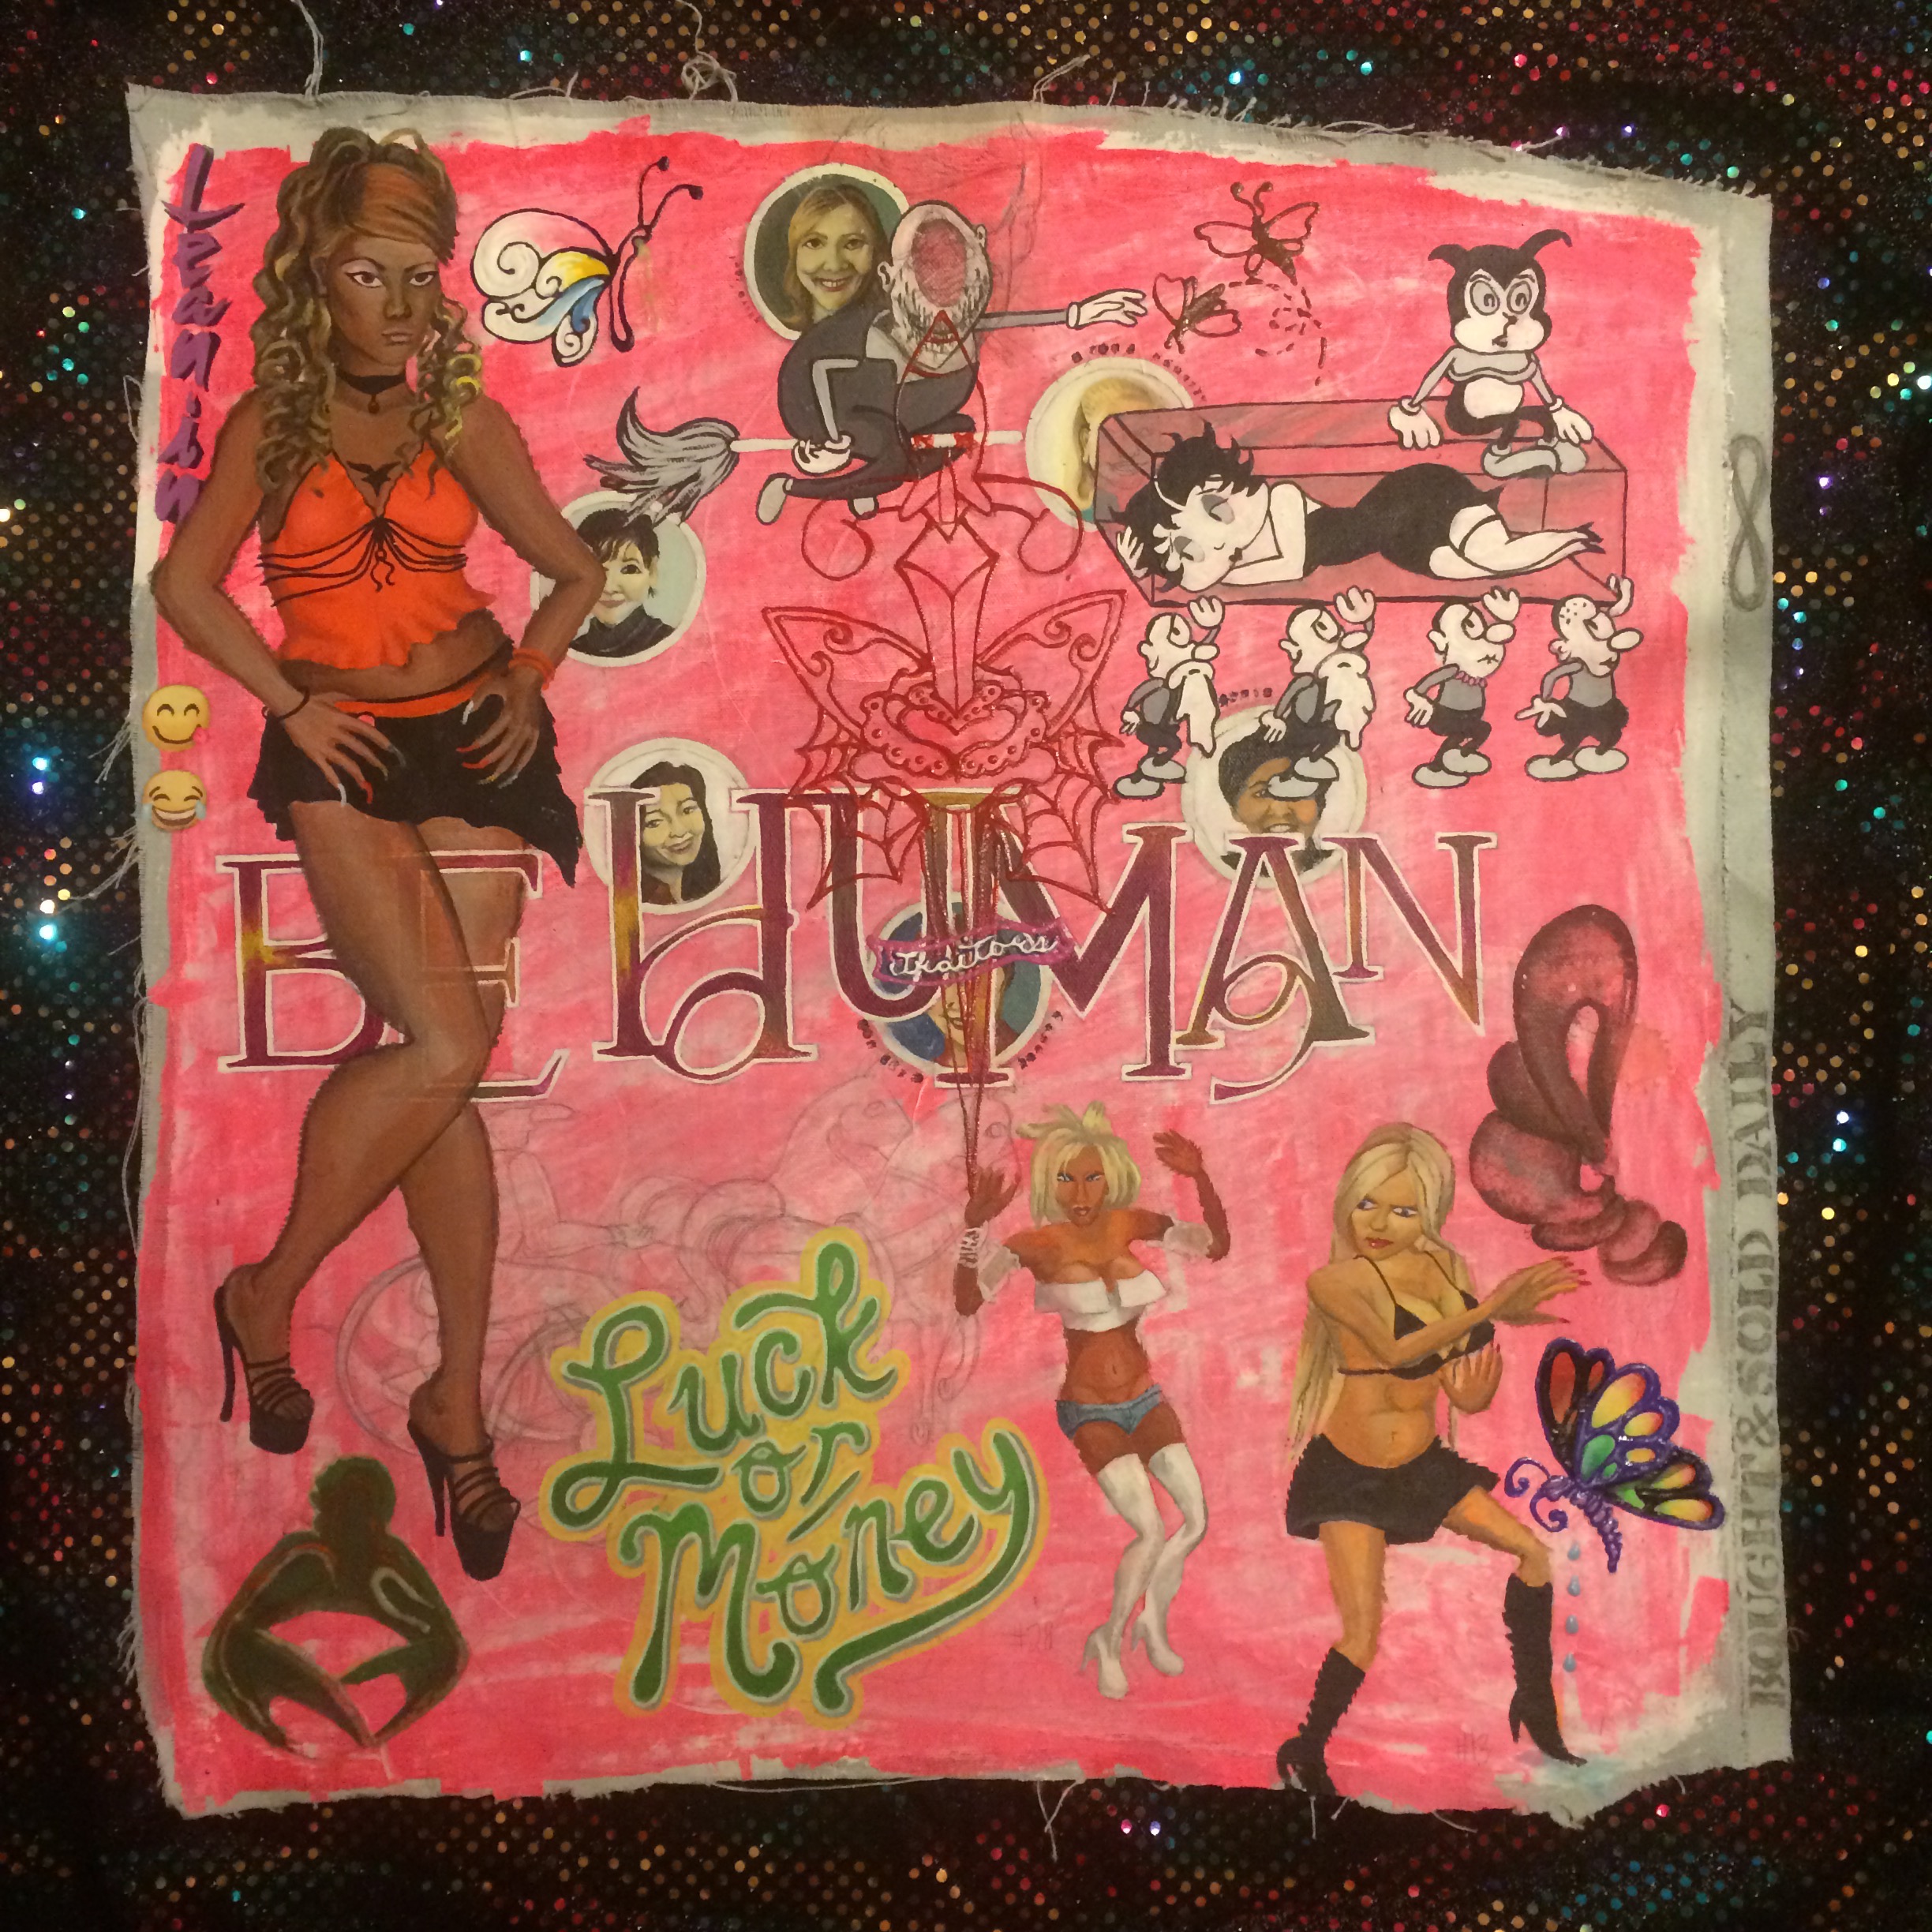 picture of Be Human Painting.  Showing the top 6 female CEOs, a large text in the style of Danielle Dax that says Be Human, and women dancing